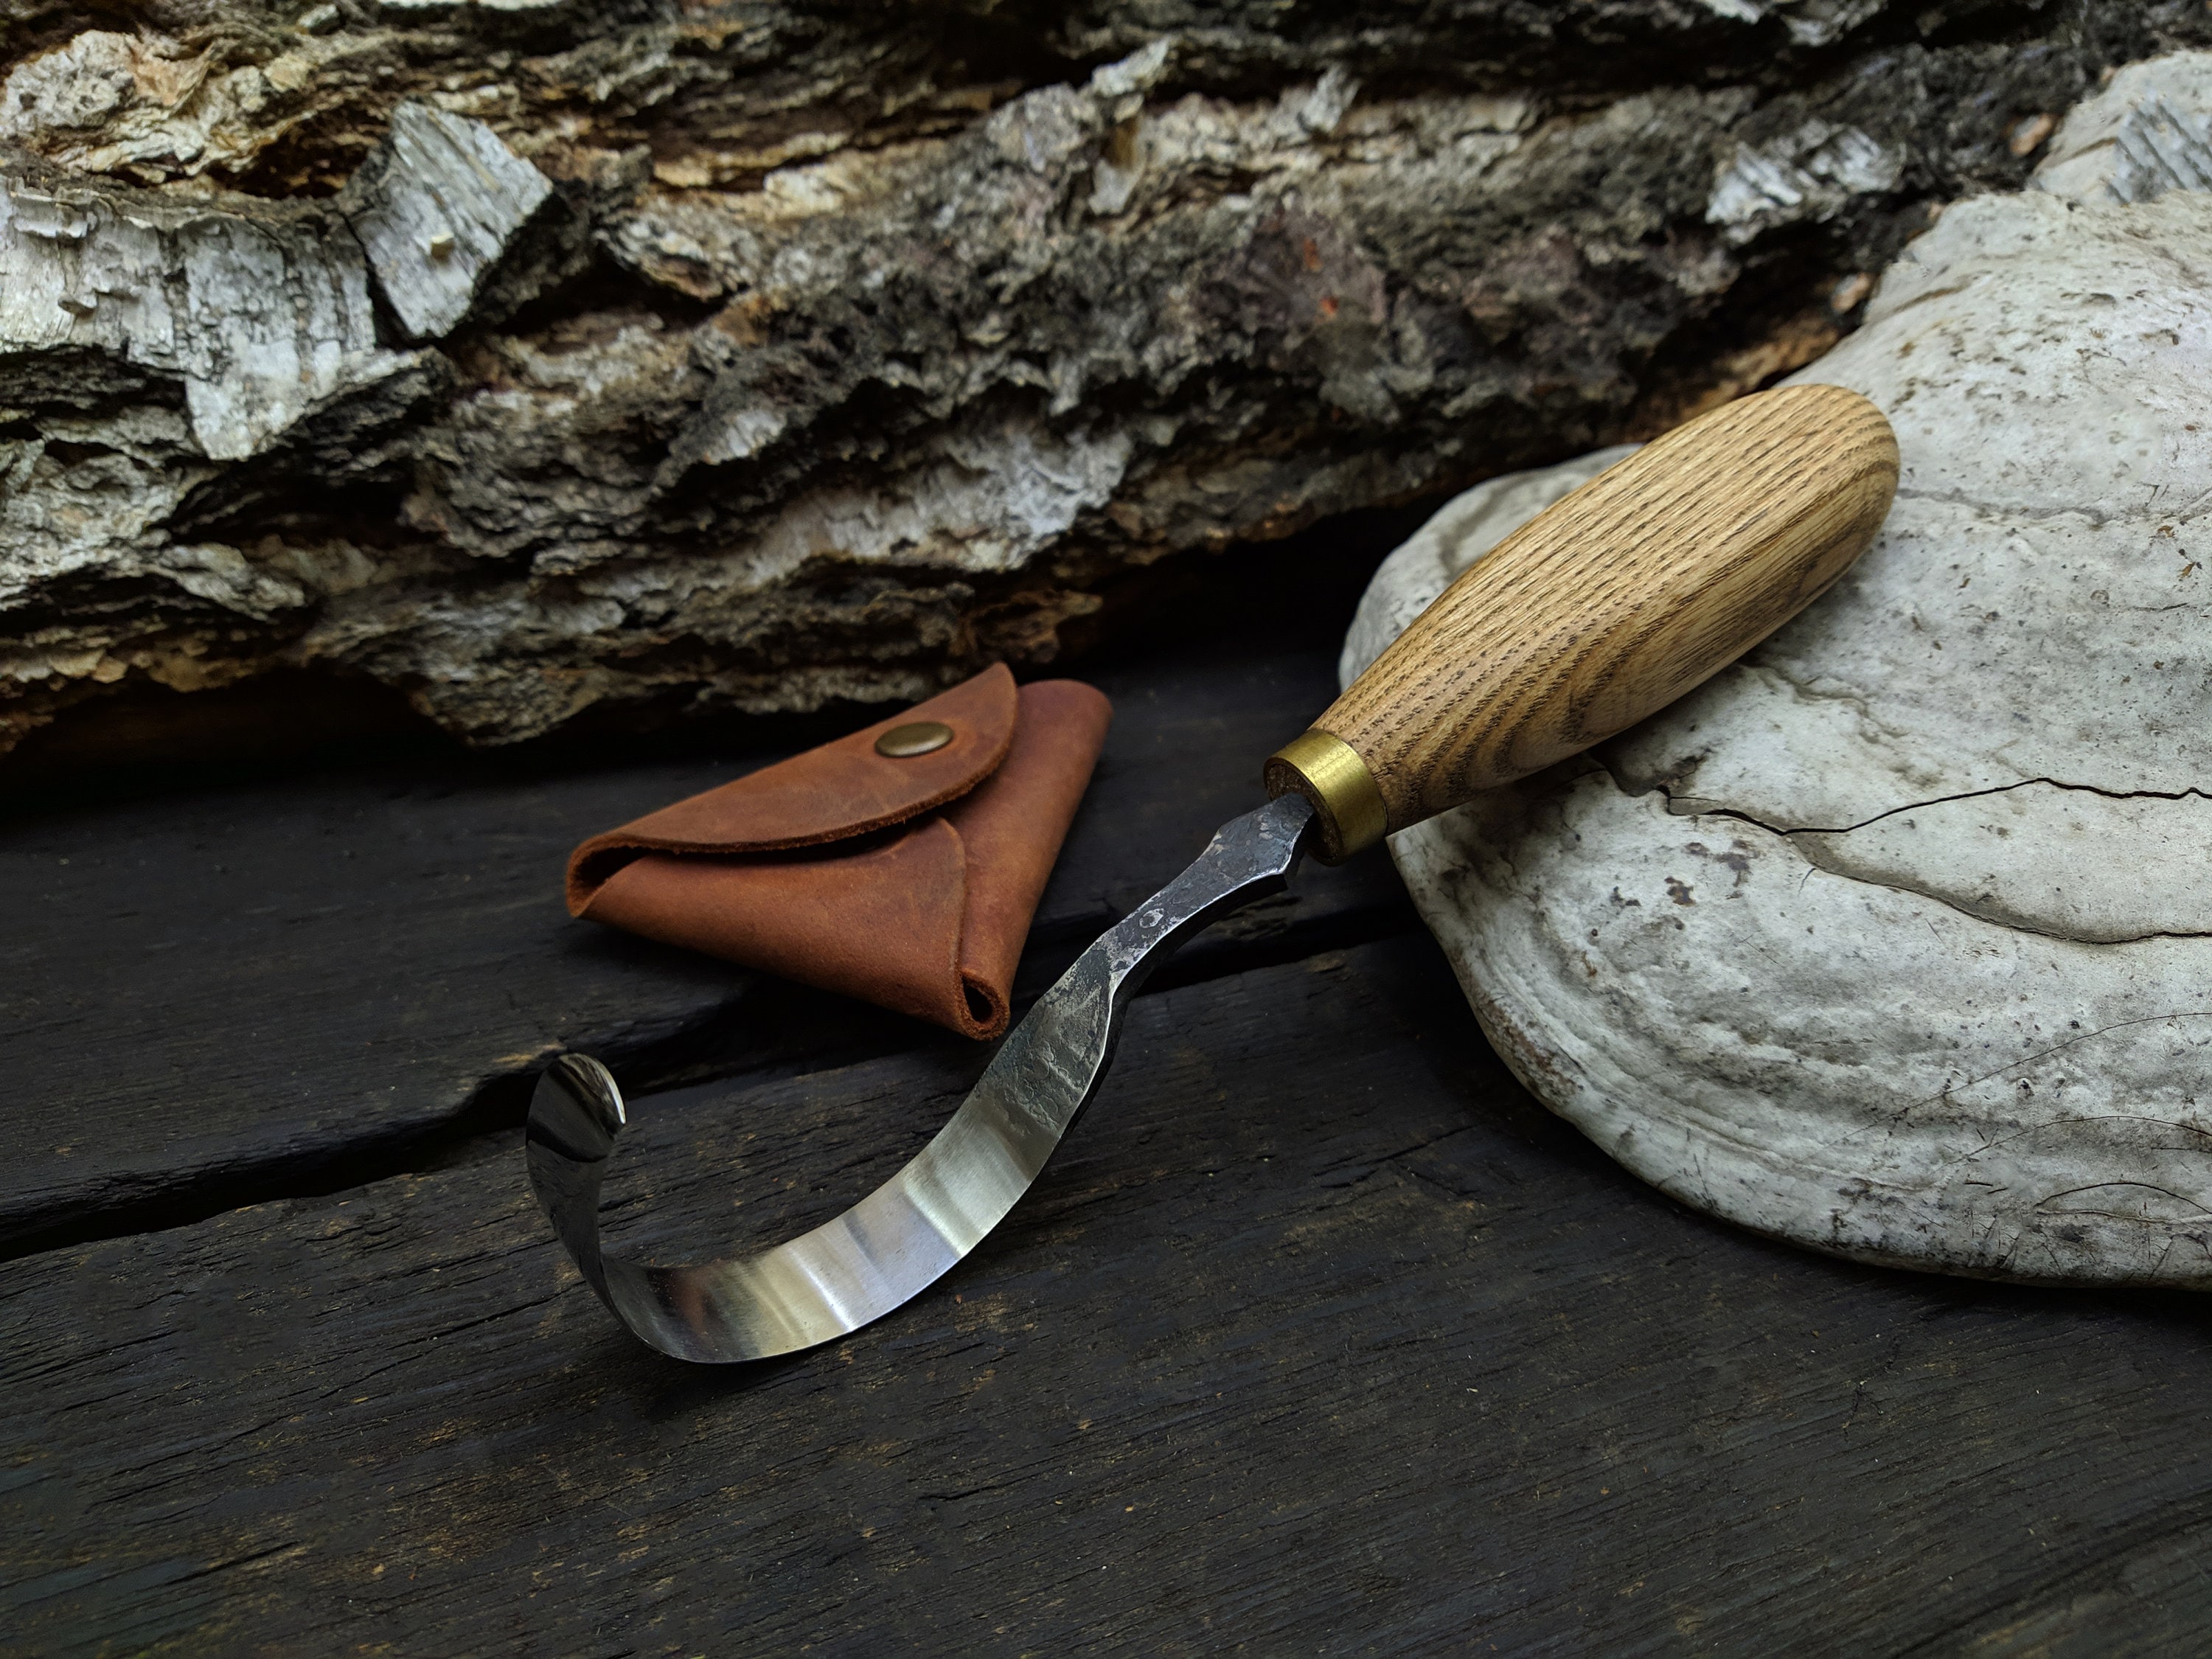 Knives Carving Bowl Kuksa. Spoon Carving Hook Knife. Forged Spoon